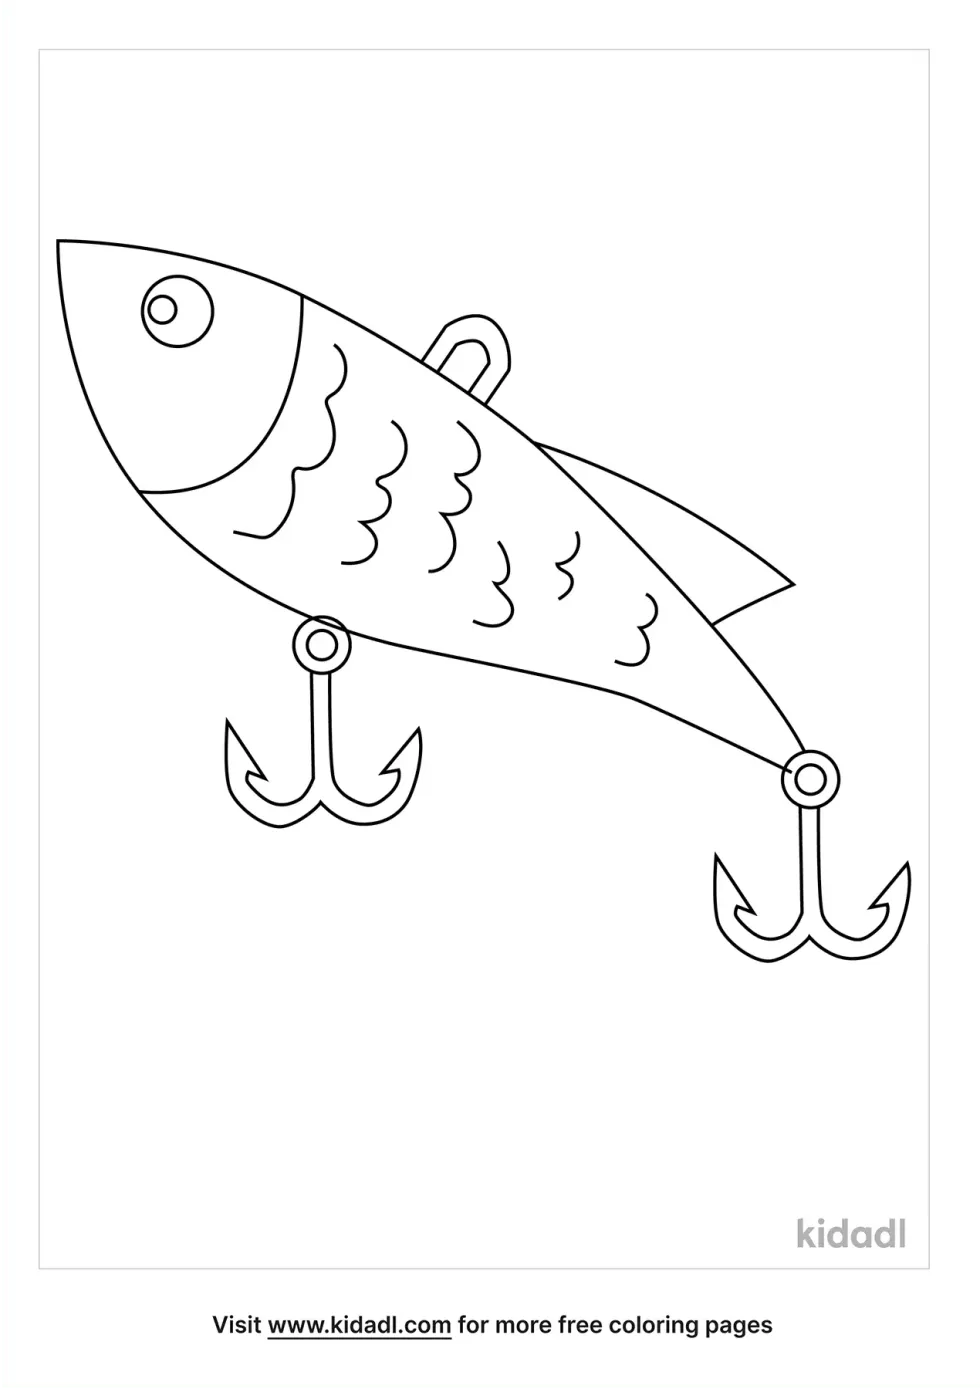 Fishing Lure Coloring Page